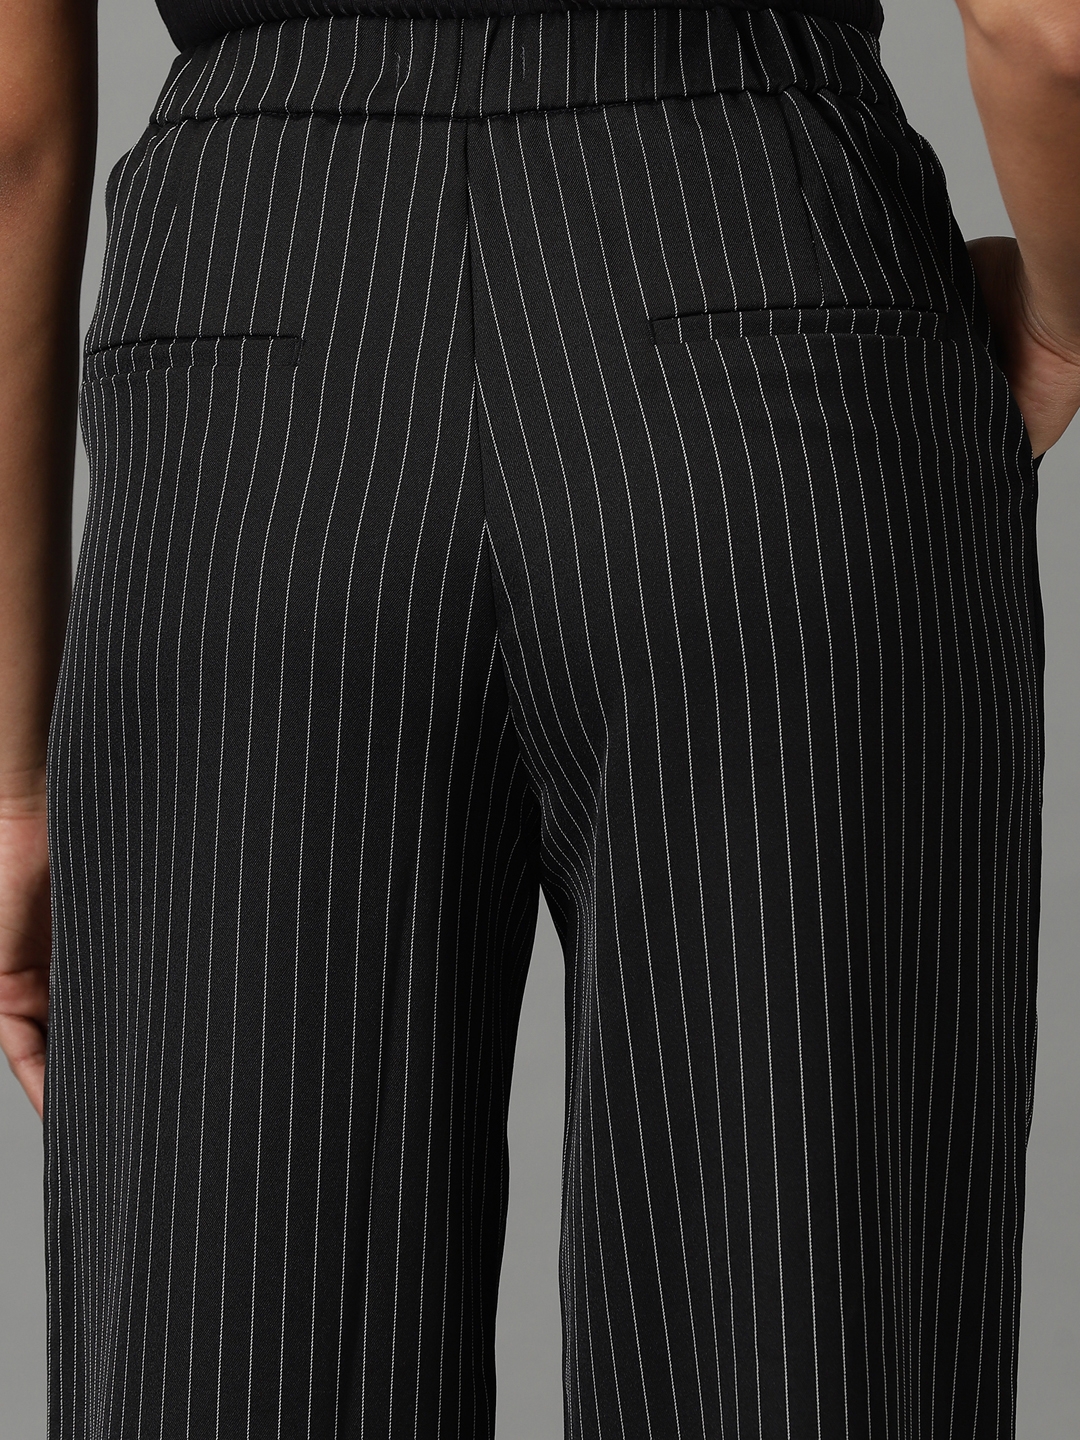 Black Stripe Belted Tapered Trousers  New Look